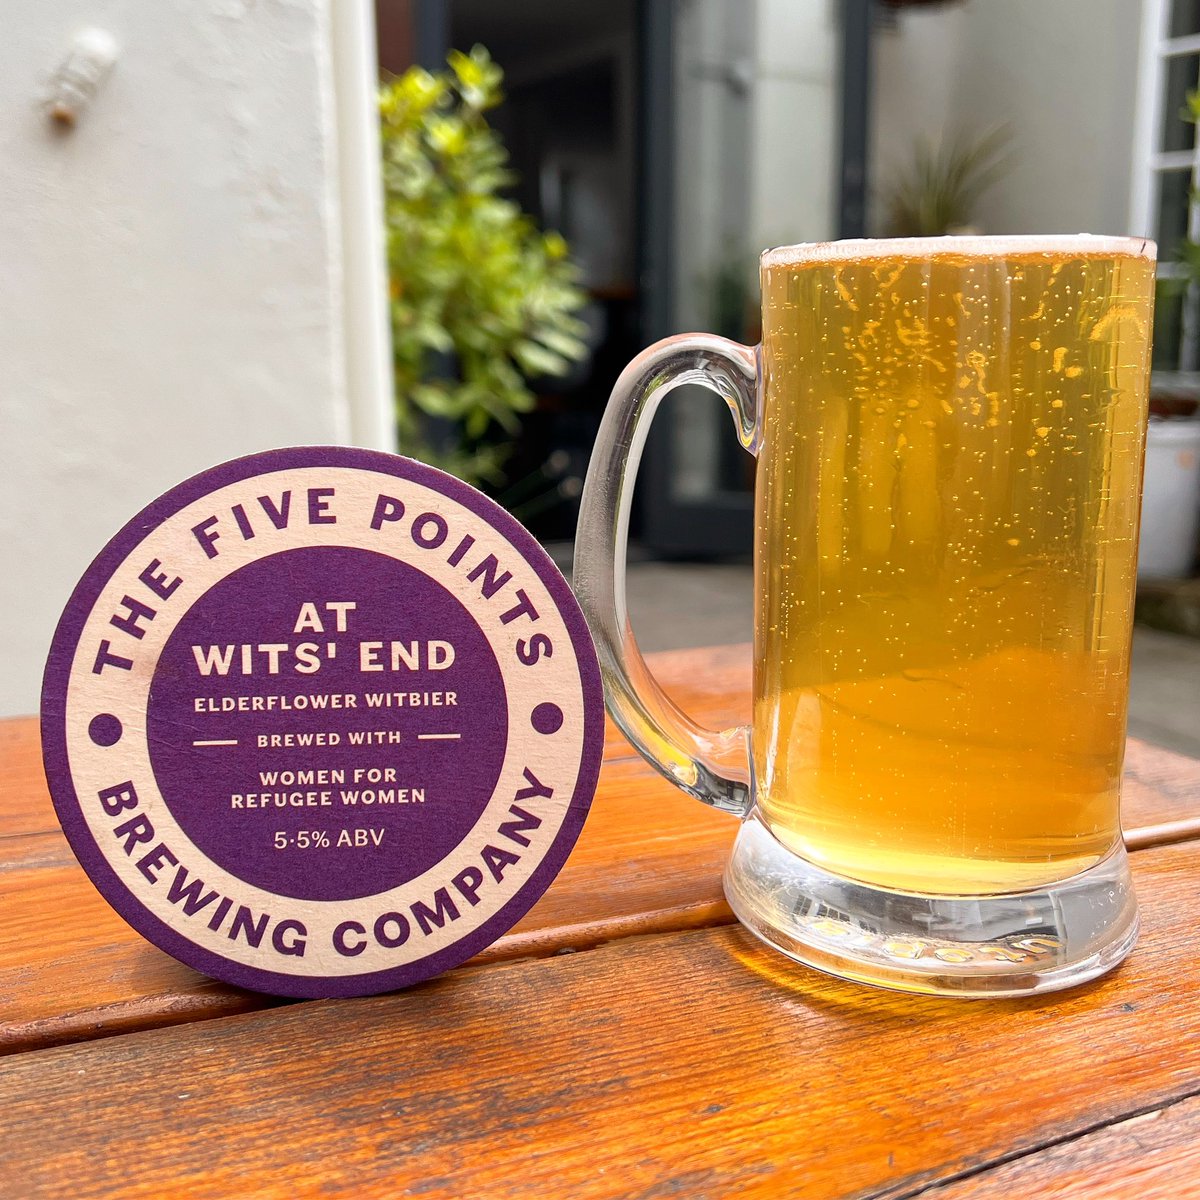 NEW on tap 2 at The Magnet 🧲 

@FivePointsBrew 
• At Wits’ End (5.5%) 🌾

#magnetcolchester
#colchesterbusiness 
#colchesterpub
#colchester
#essexpub
#fivepointsbrewingco 
#micropub